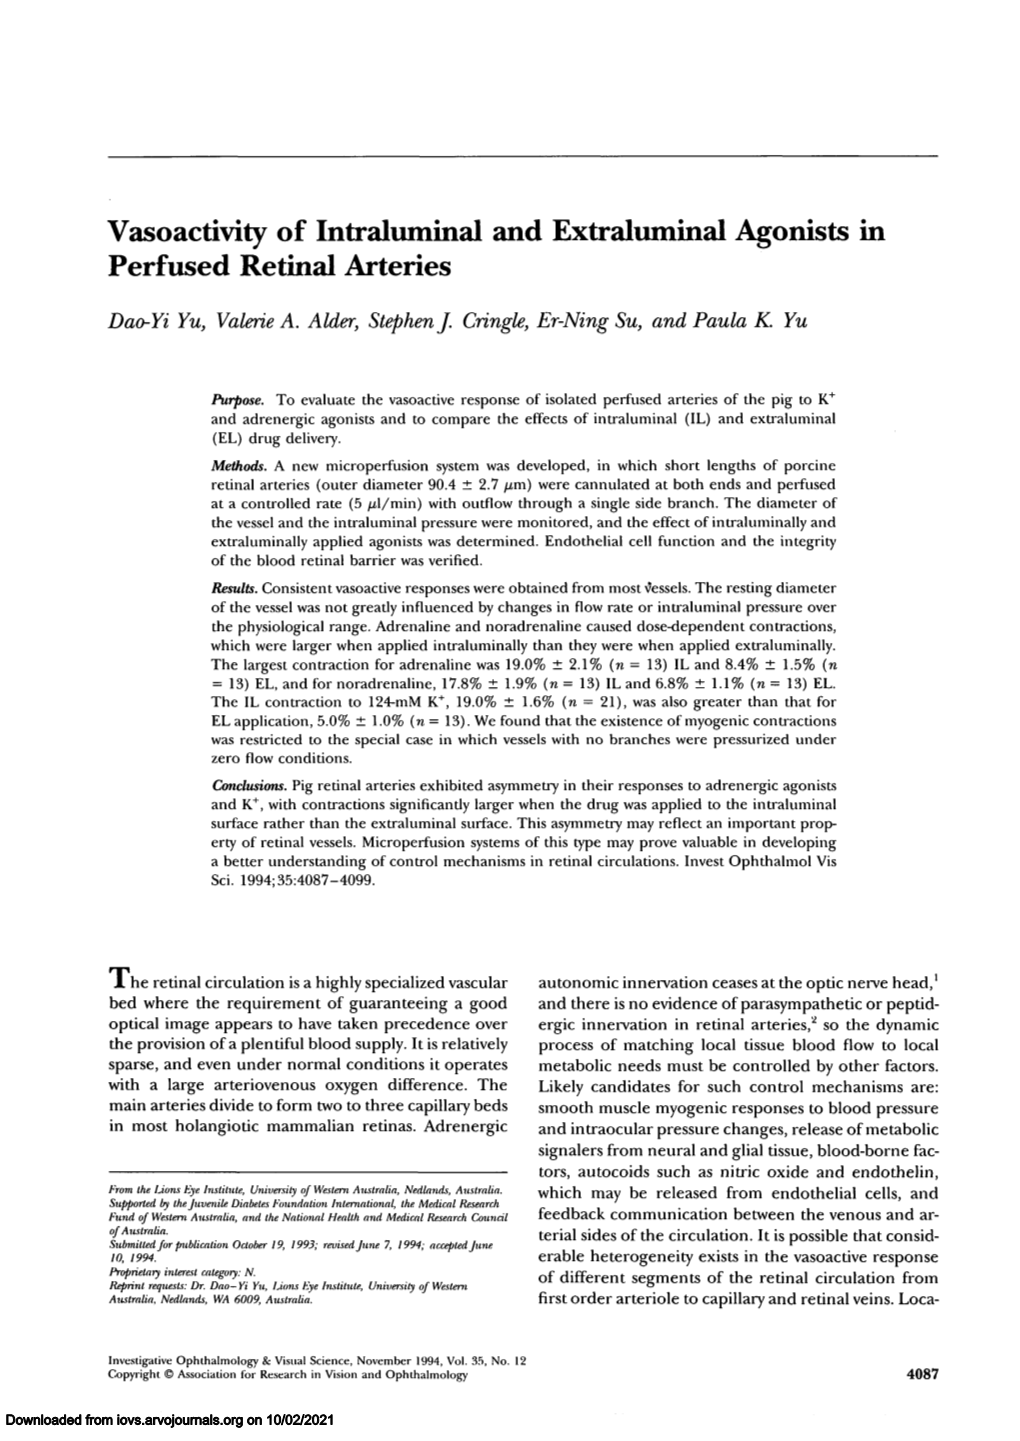 Vasoactivity of Intraluminal and Extraluminal Agonists in Perfused Retinal Arteries